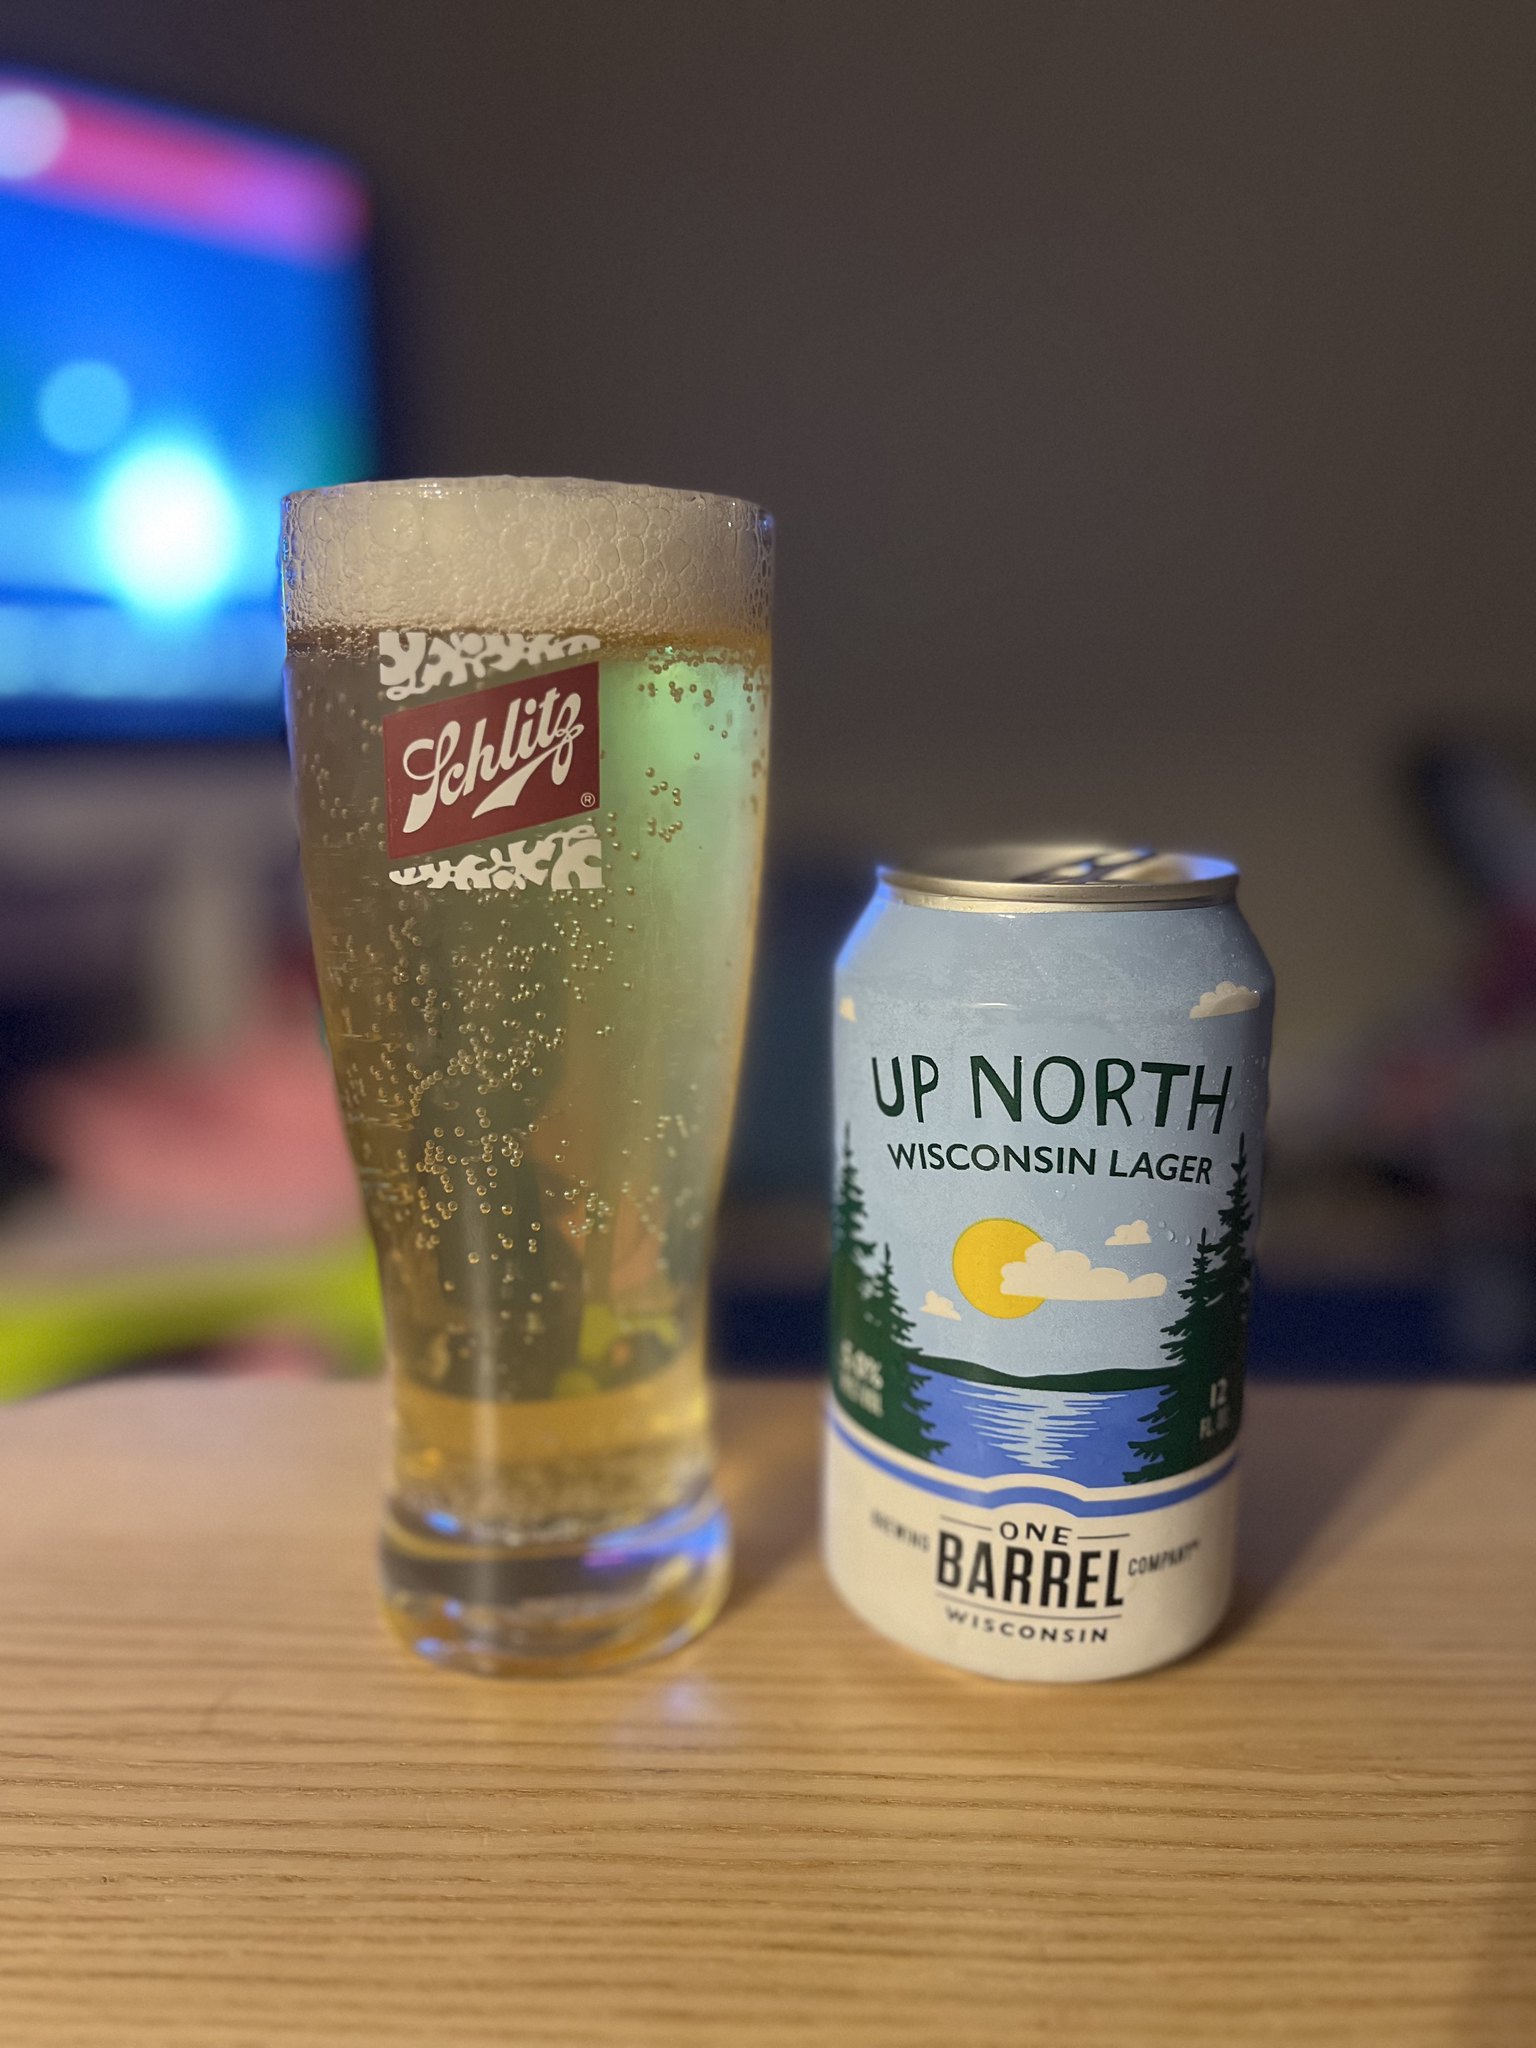 Up North Wisconsin Lager